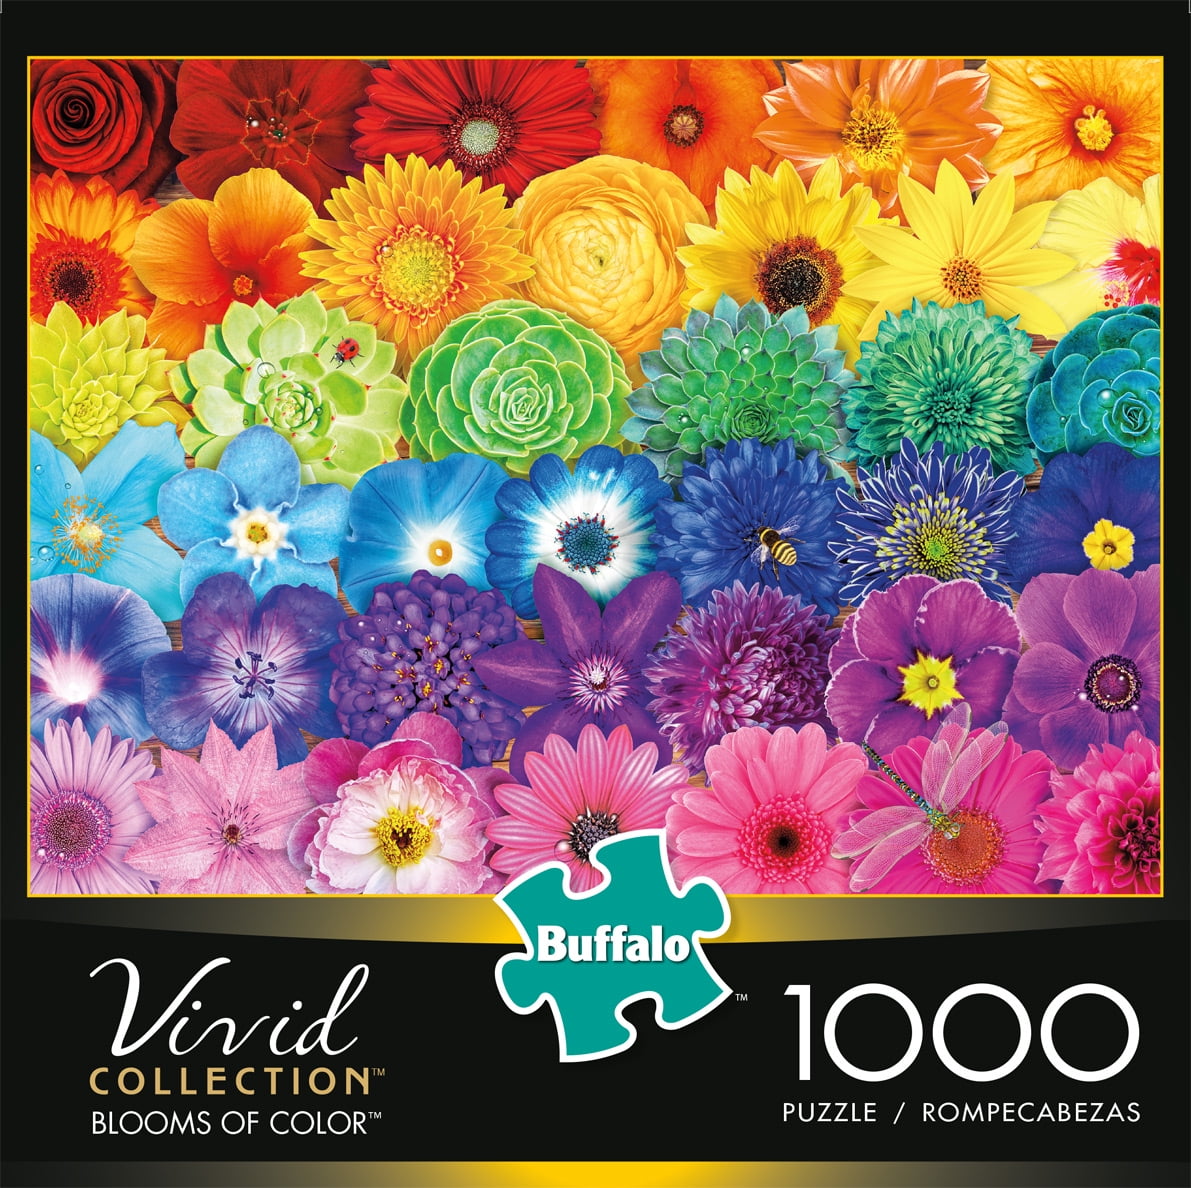 BLOOMS OF COLOR 1000 Piece Jigsaw Puzzle Buffalo Vivid Coll 26 in x 19 in 